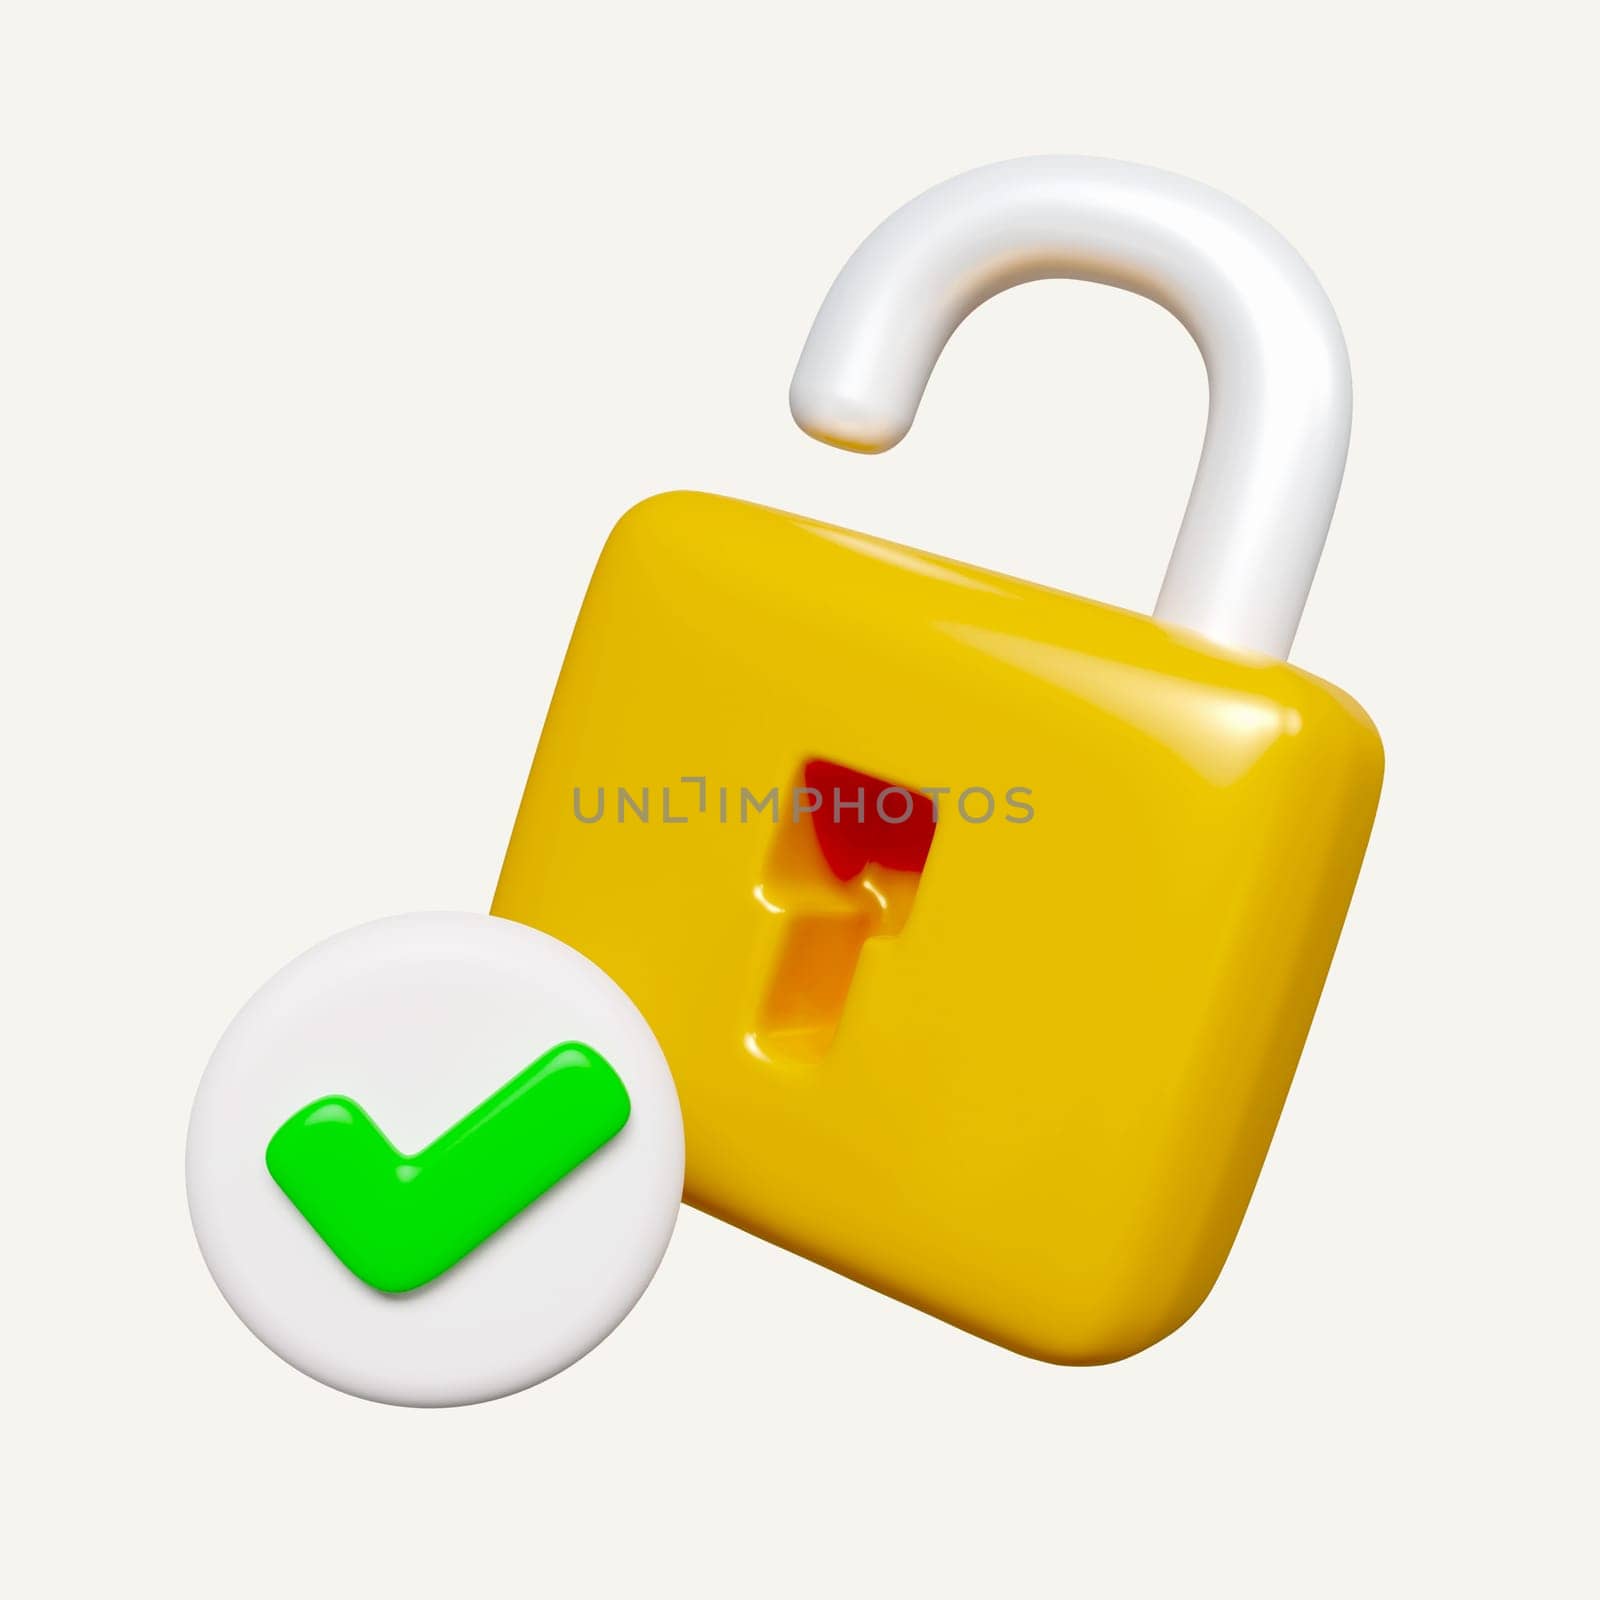 3d Yellow unlocked padlock icon with green check symbol. Security concept. icon isolated on white background. 3d rendering illustration. Clipping path..